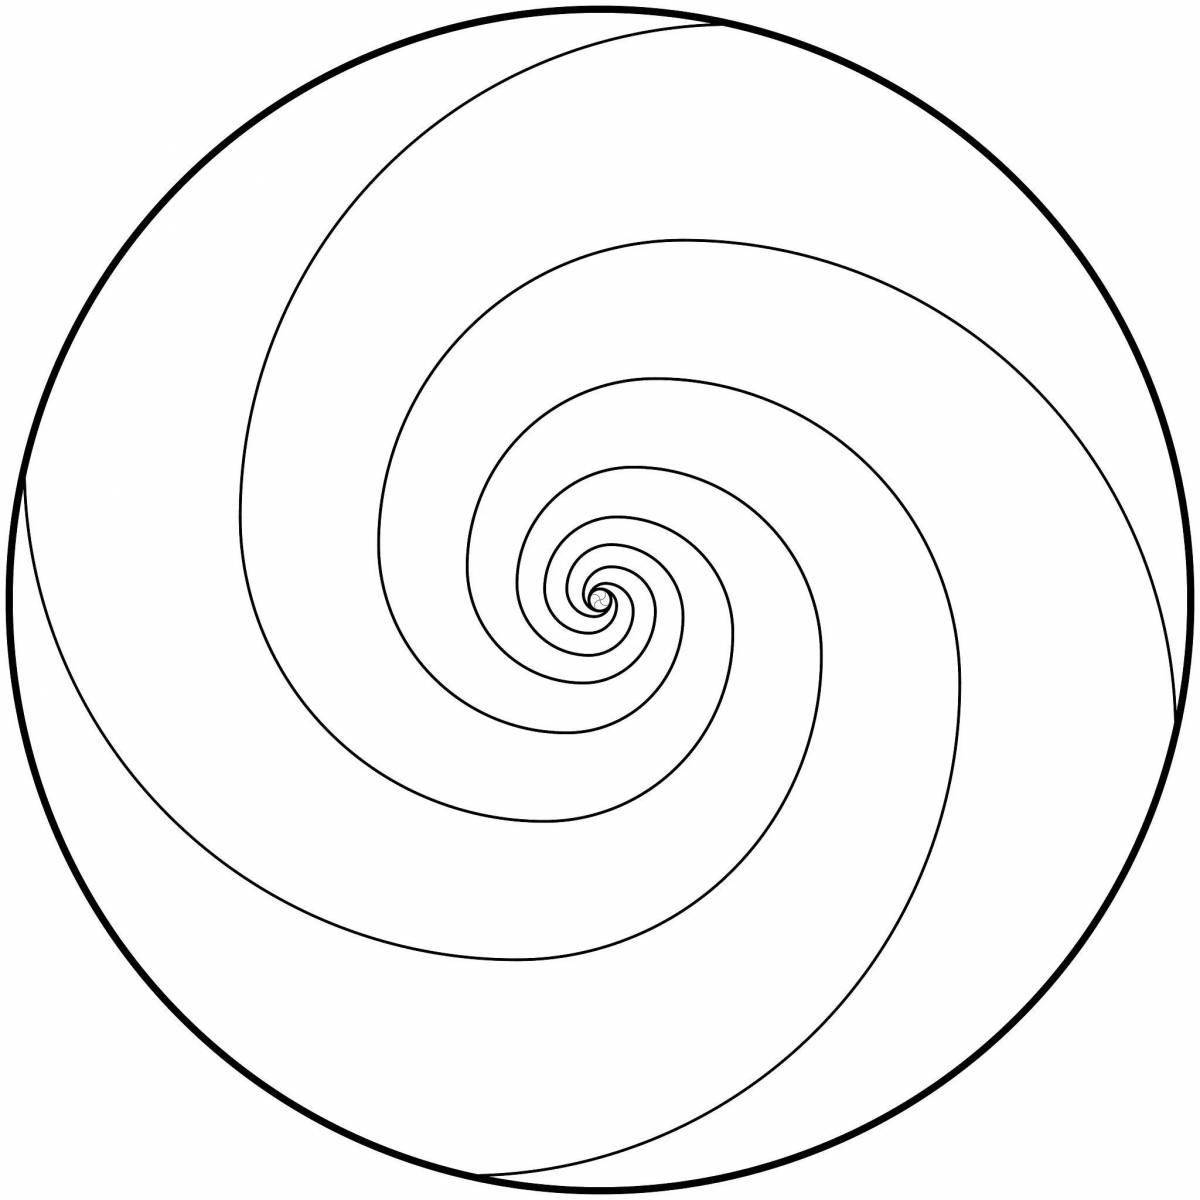 Anime glowing spiral coloring page